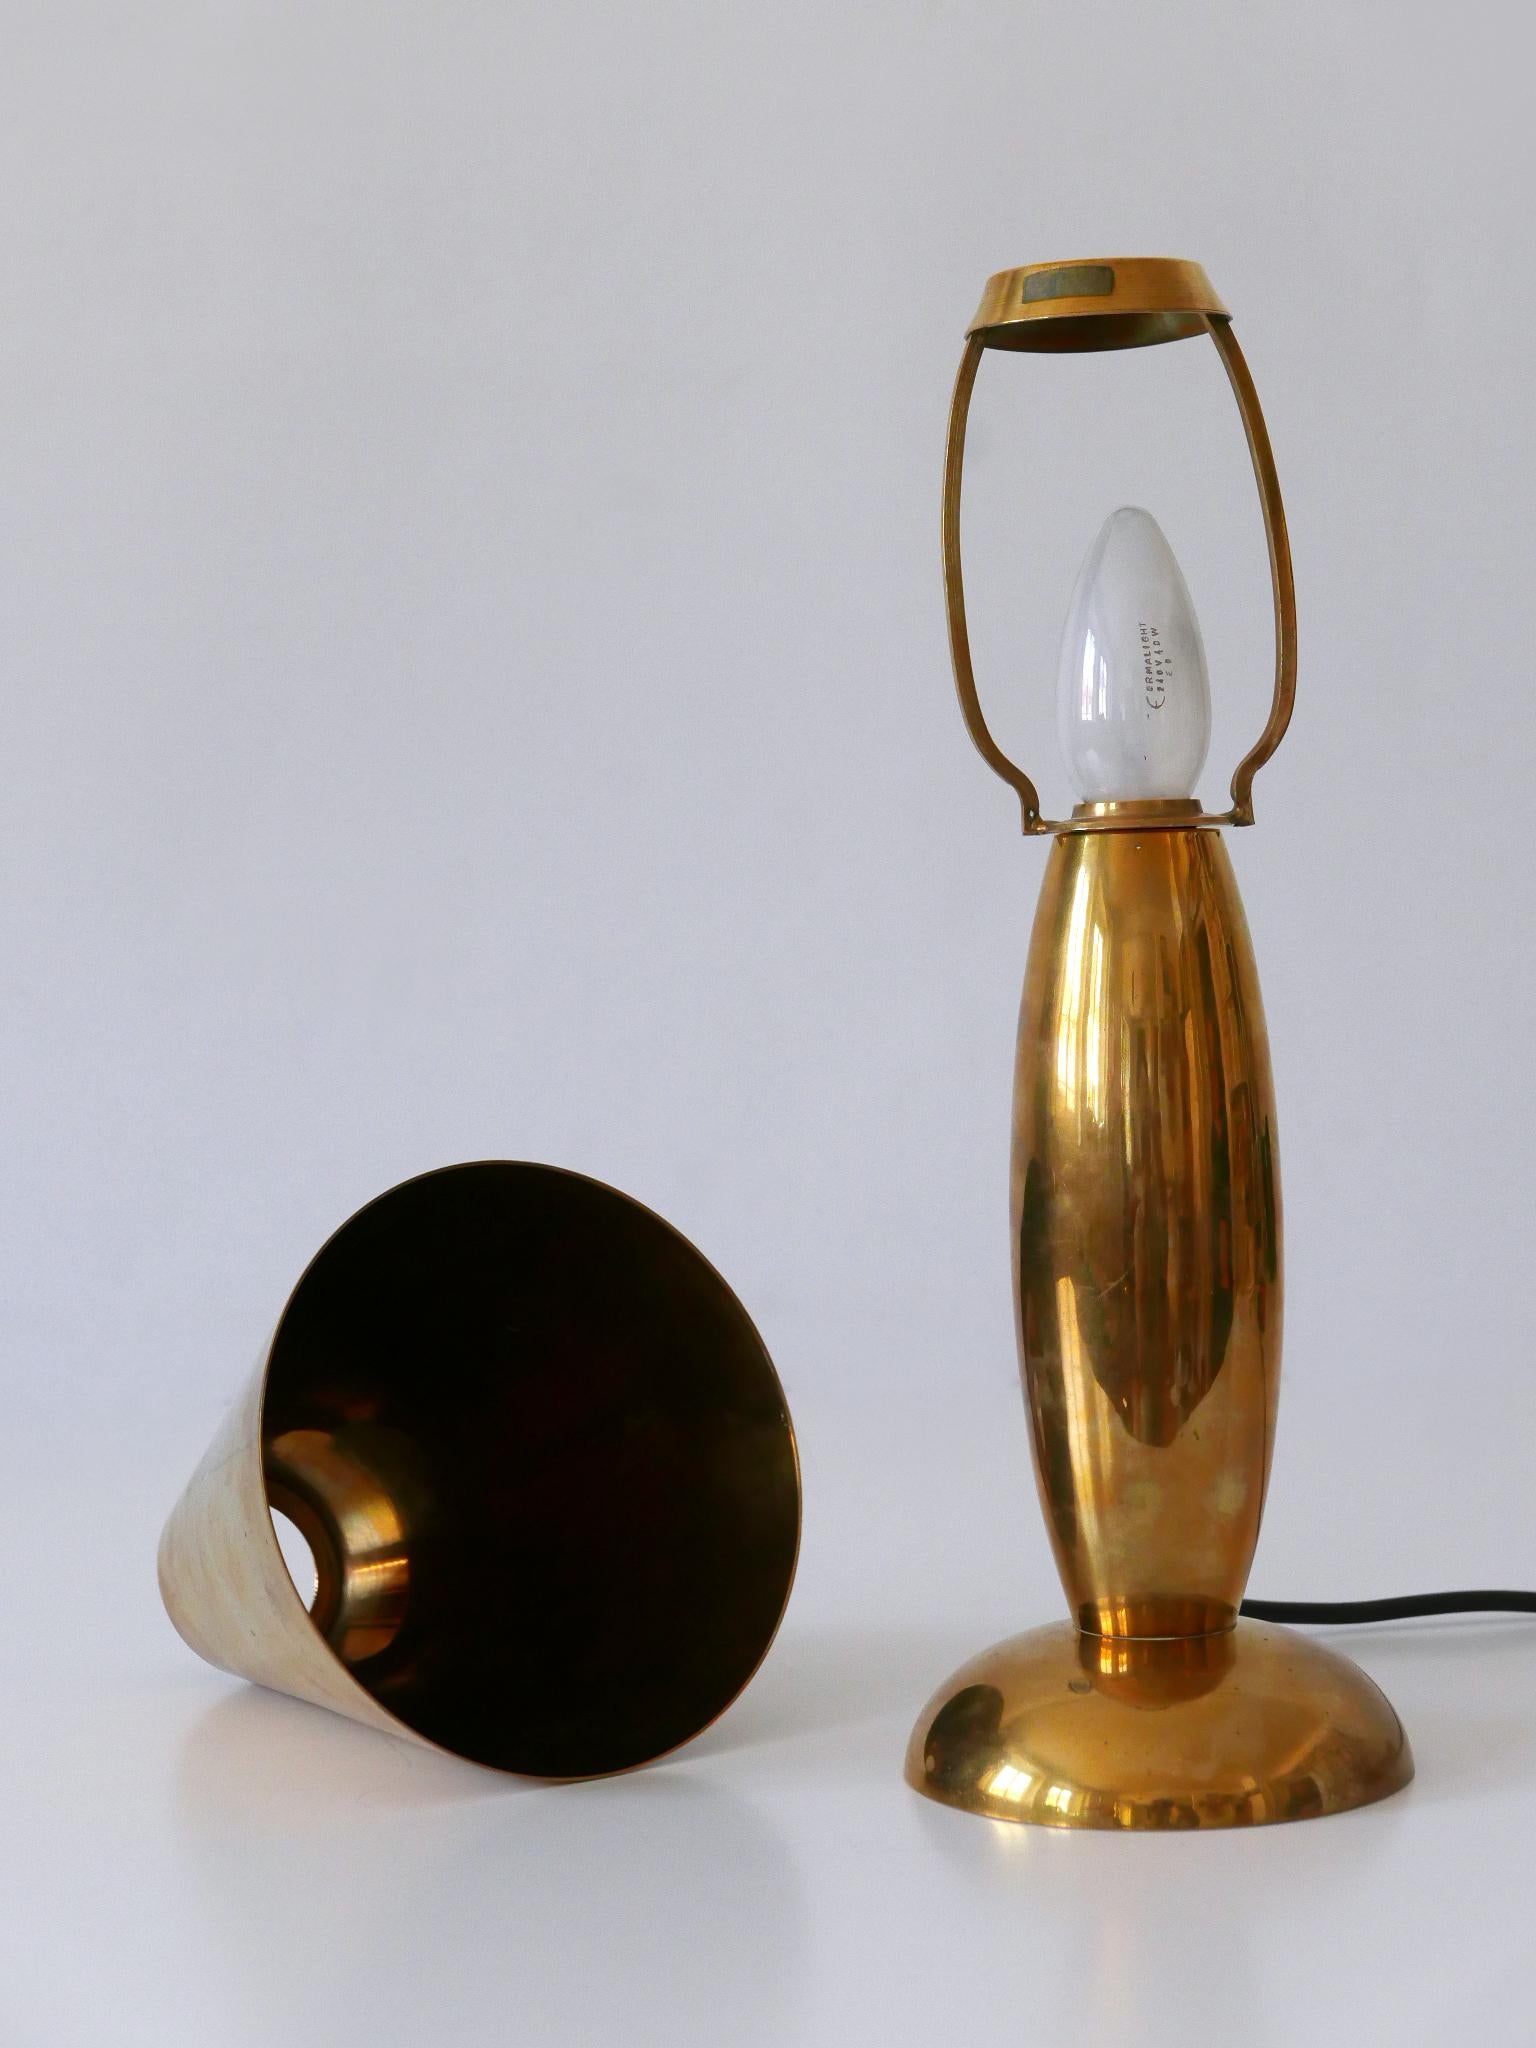 Rare & Lovely Mid-Century Modern Brass Side Table Lamp by Lambert Germany 1970s For Sale 14